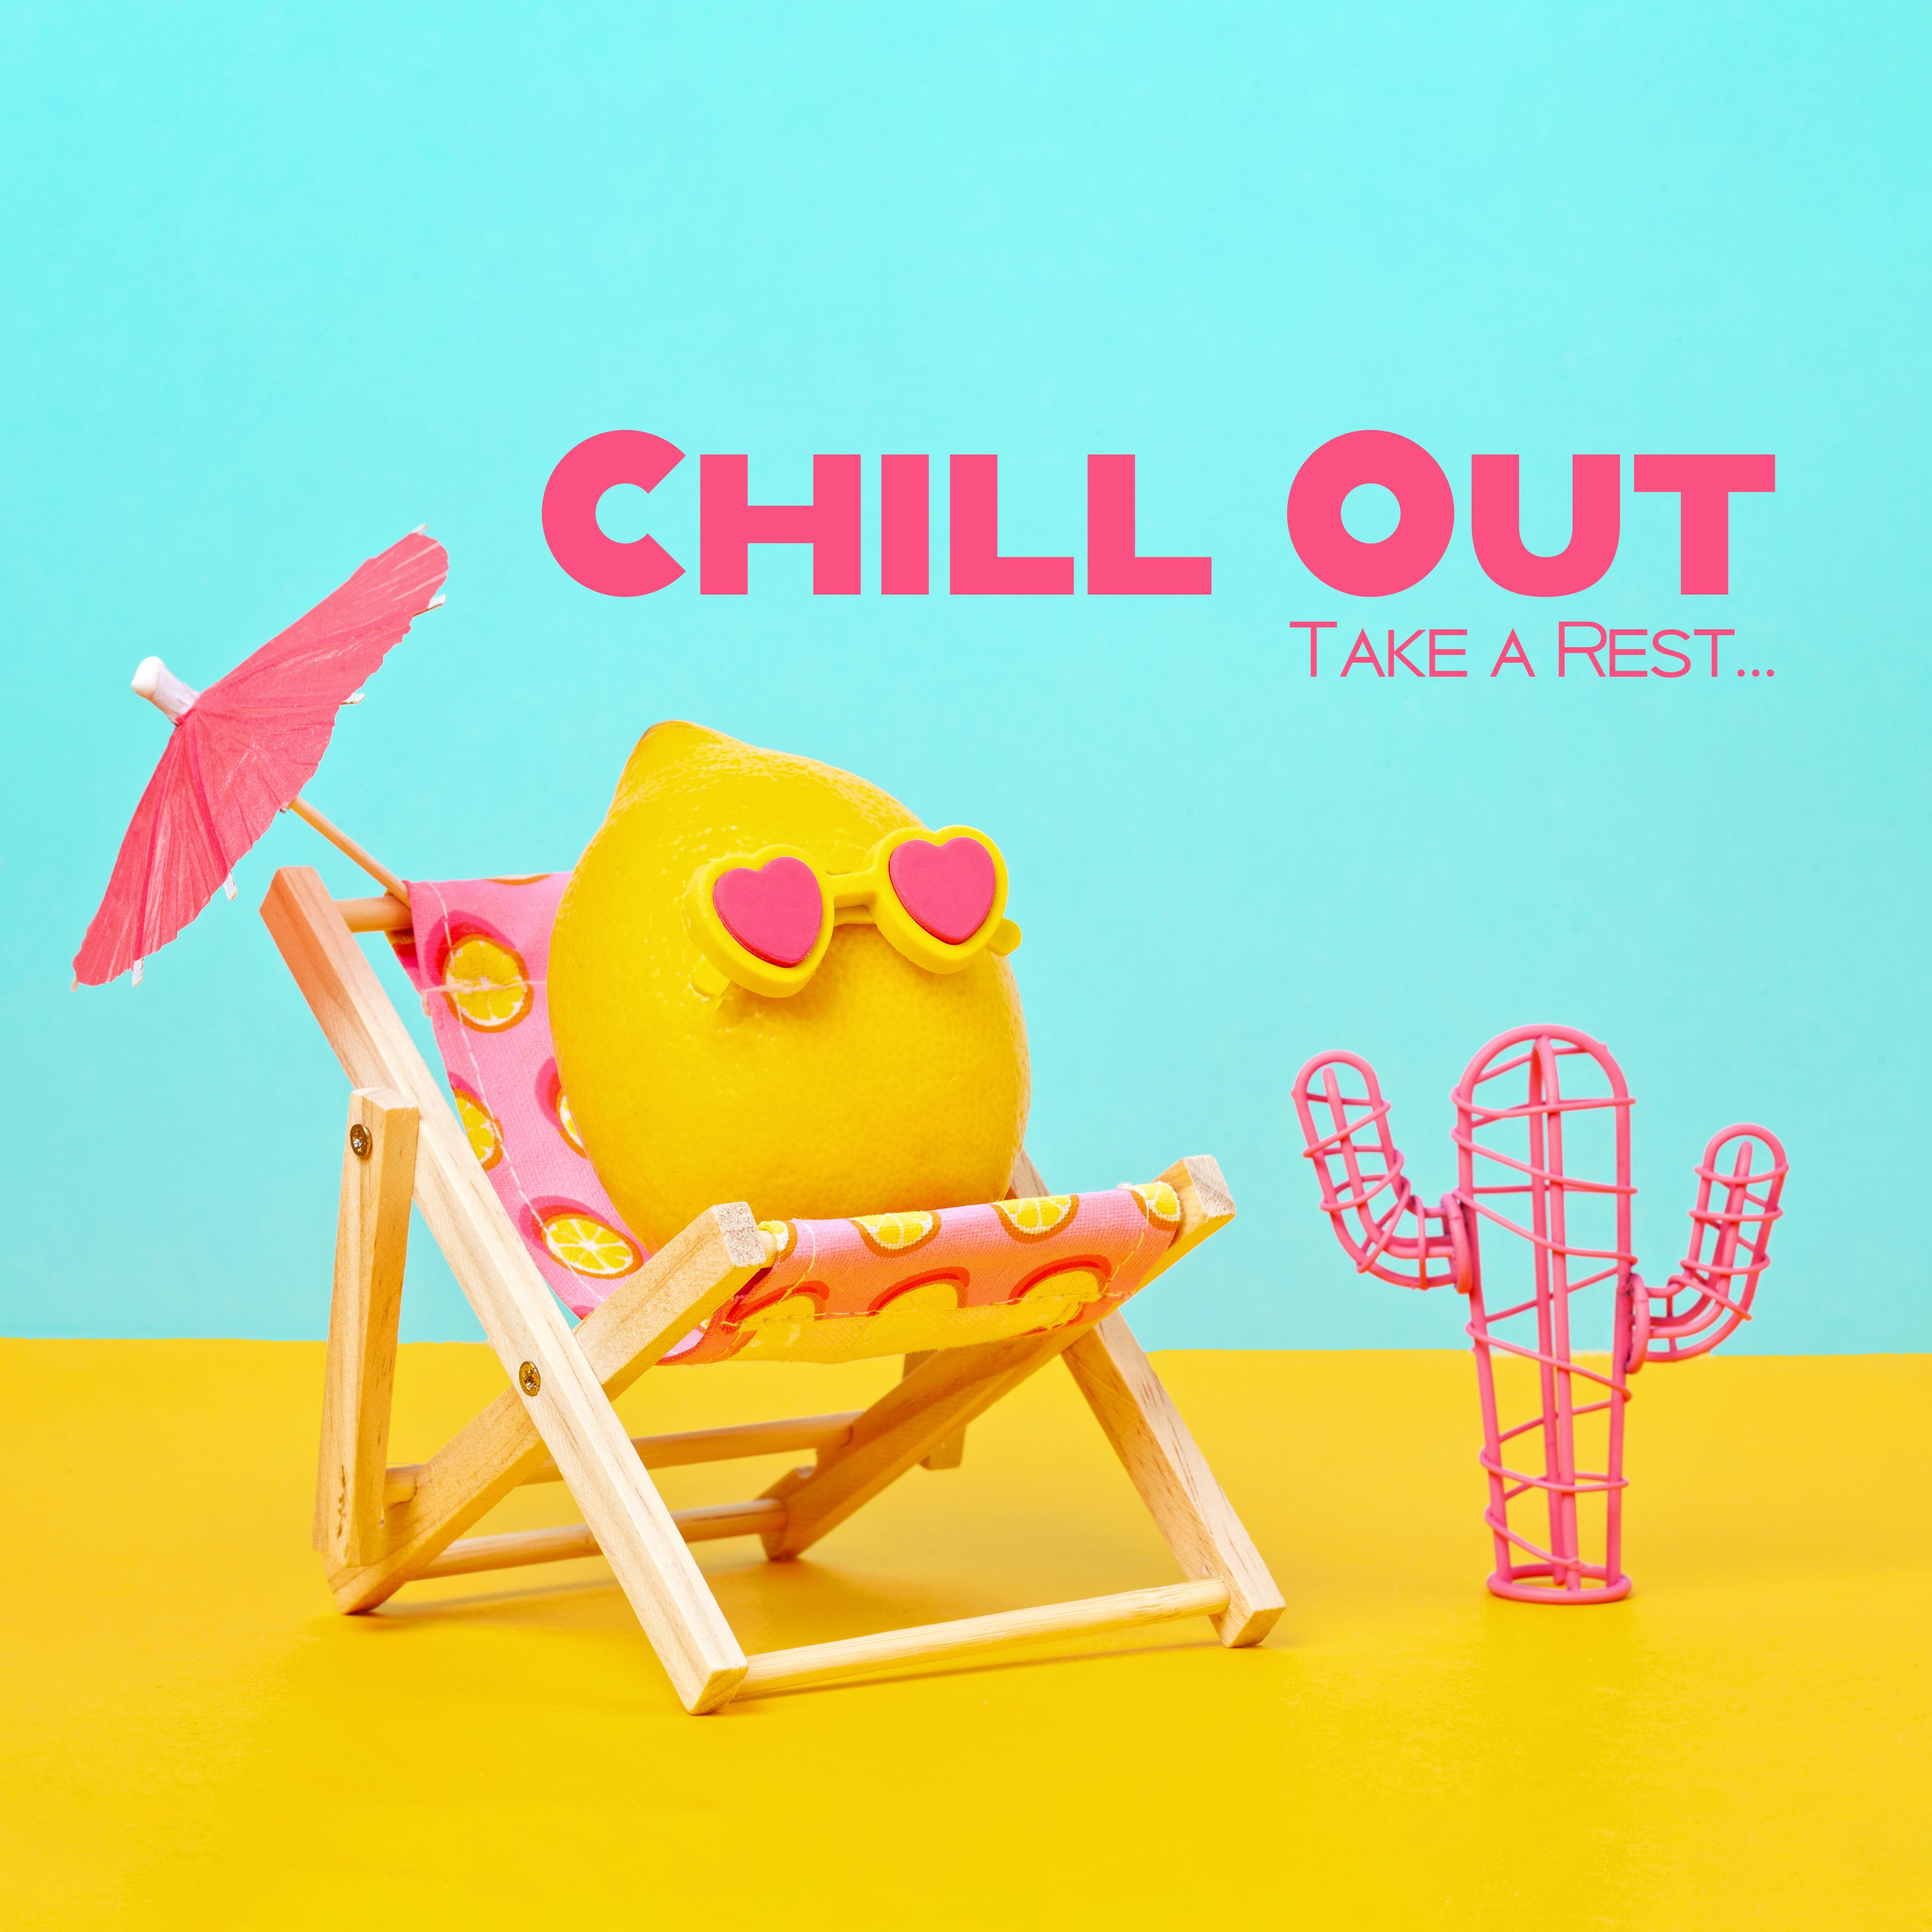 Chill Out, Take a Rest… - 2019 Most Relaxing Chillout Music Vibes, Tropical Relax Beats & Deep Melodies, Lounge Songs, Calming Down, Stress Relief